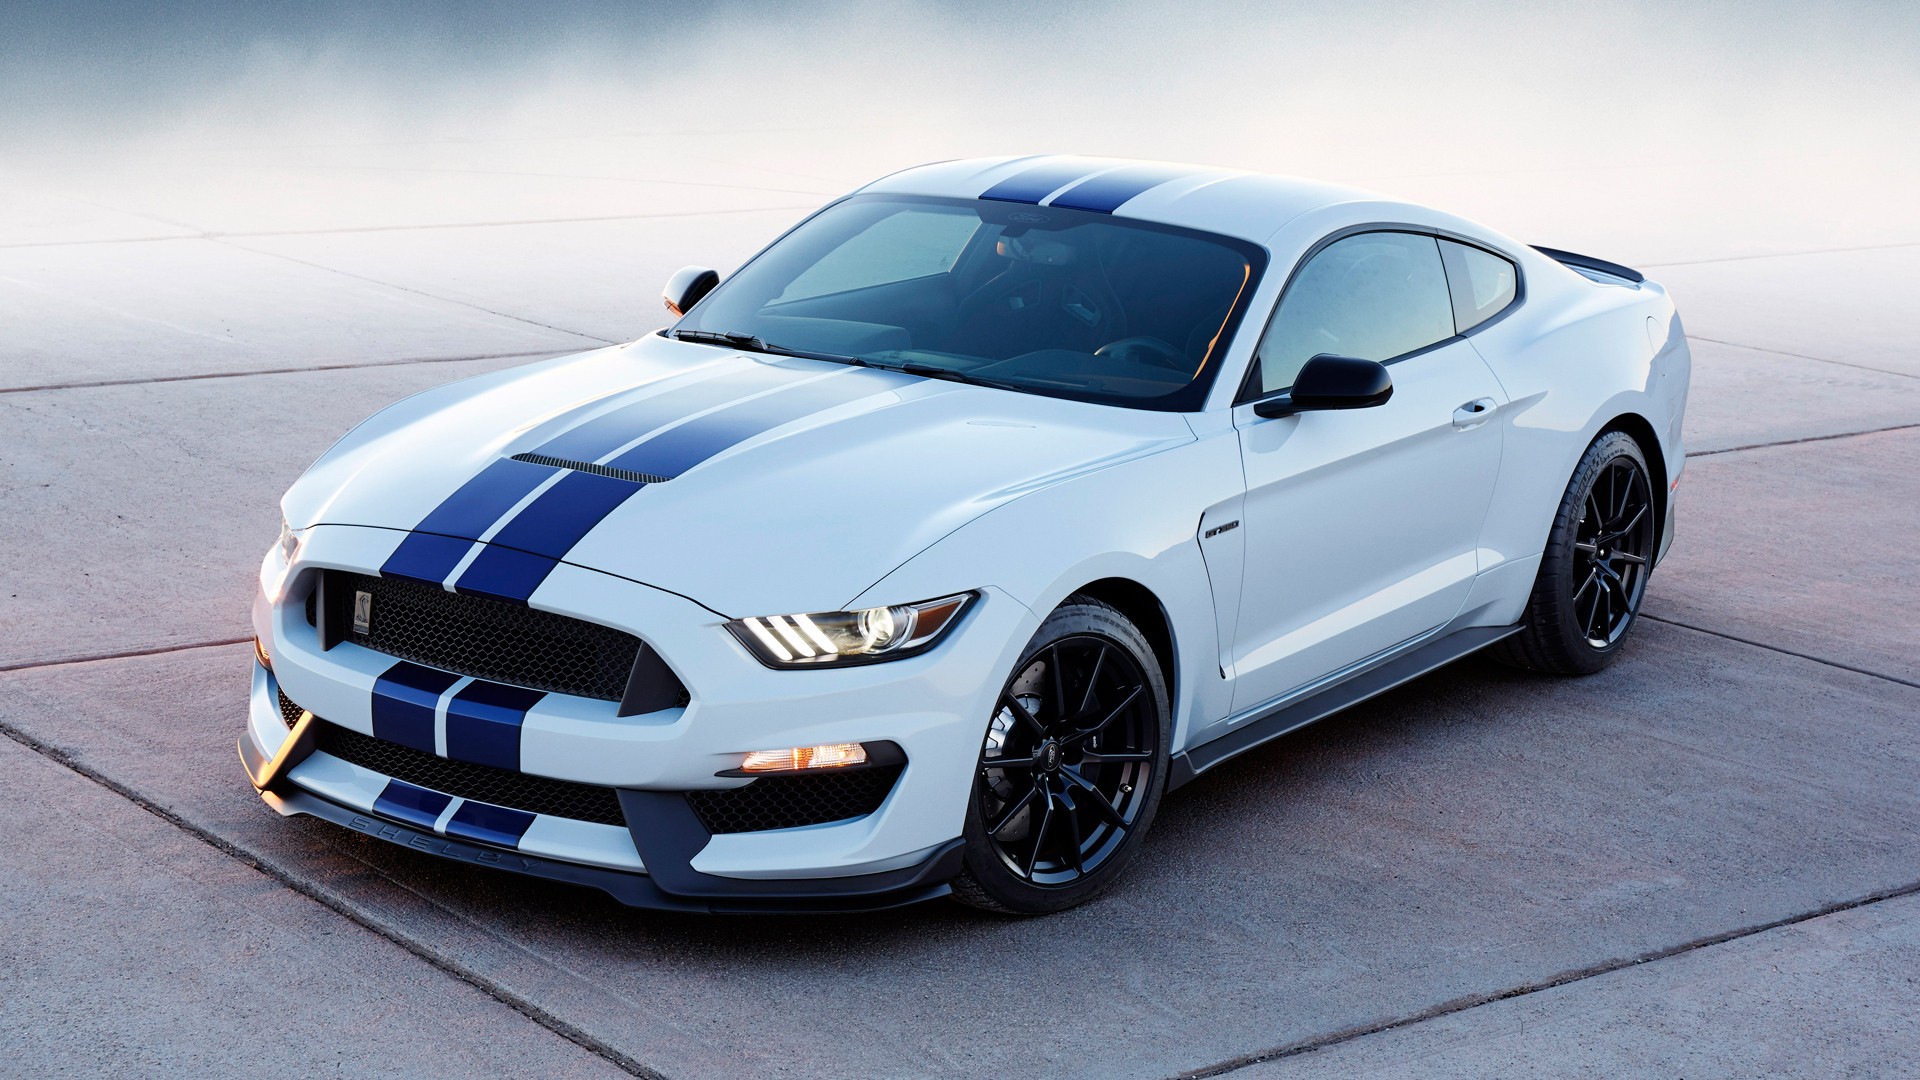 General 1920x1080 car Ford Mustang Shelby Ford Ford Mustang Shelby white cars racing stripes American cars muscle cars